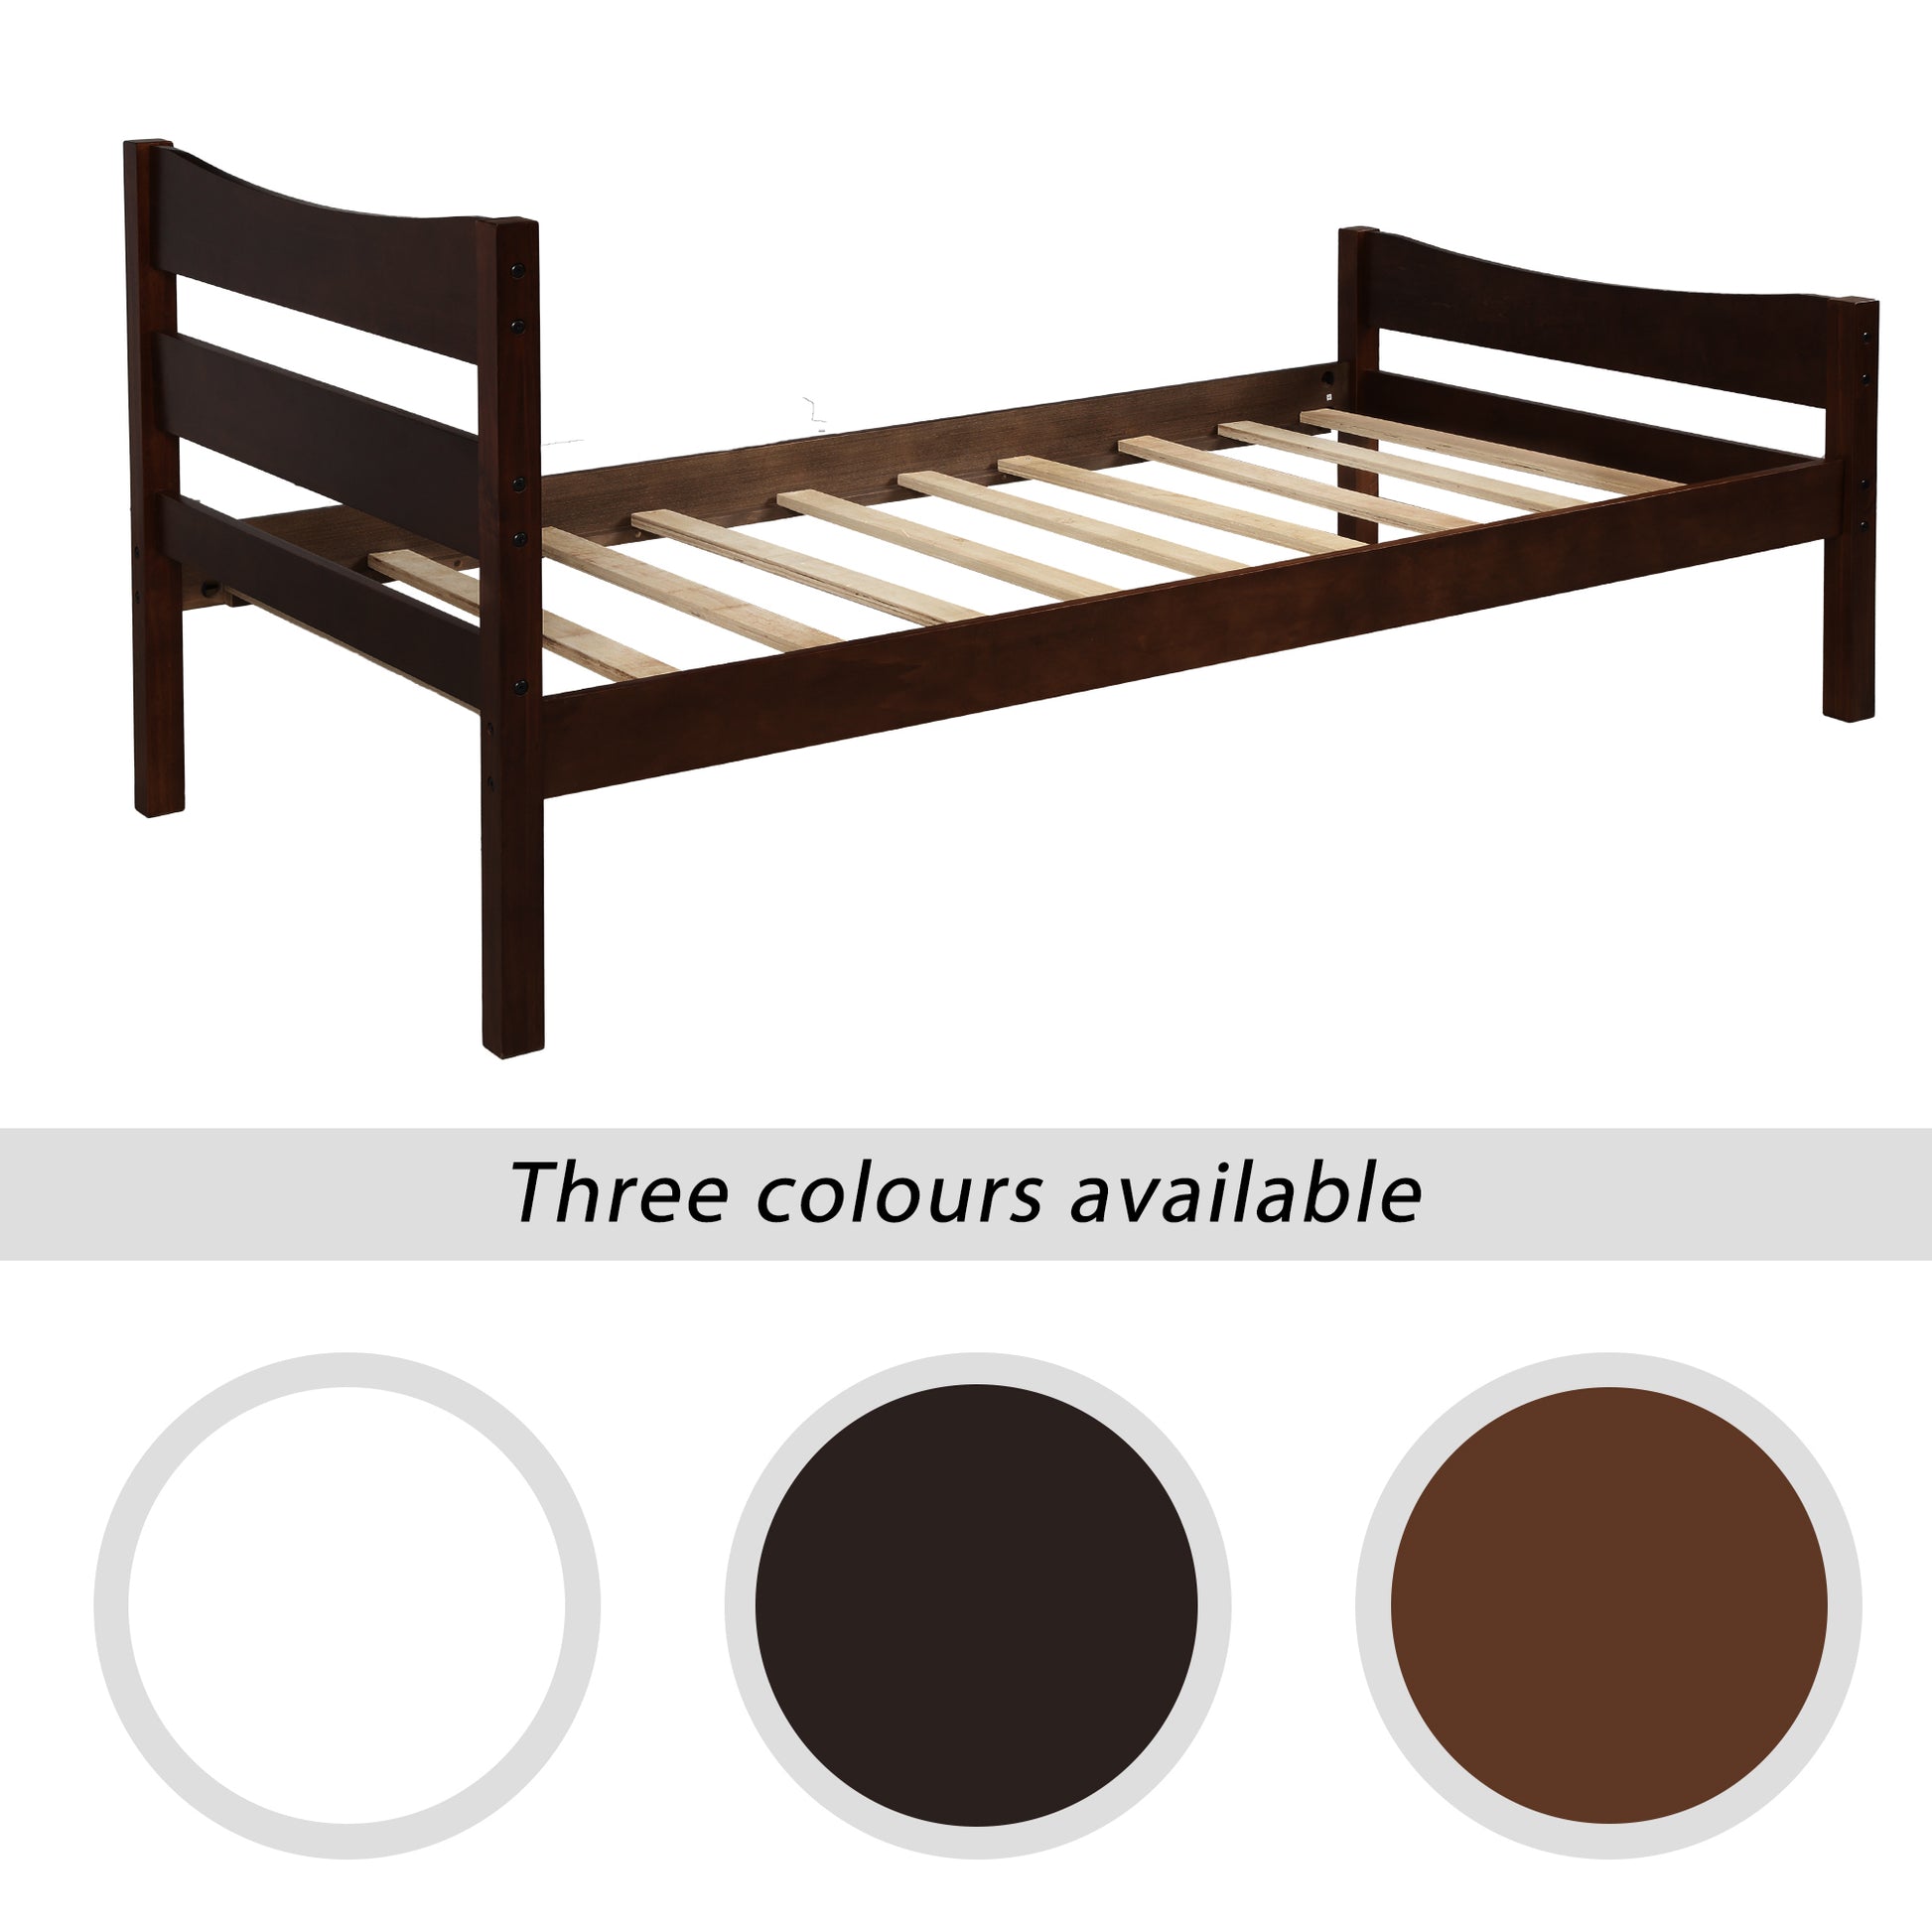 Traditional Twin Size Wooden Platform Bed in Espresso